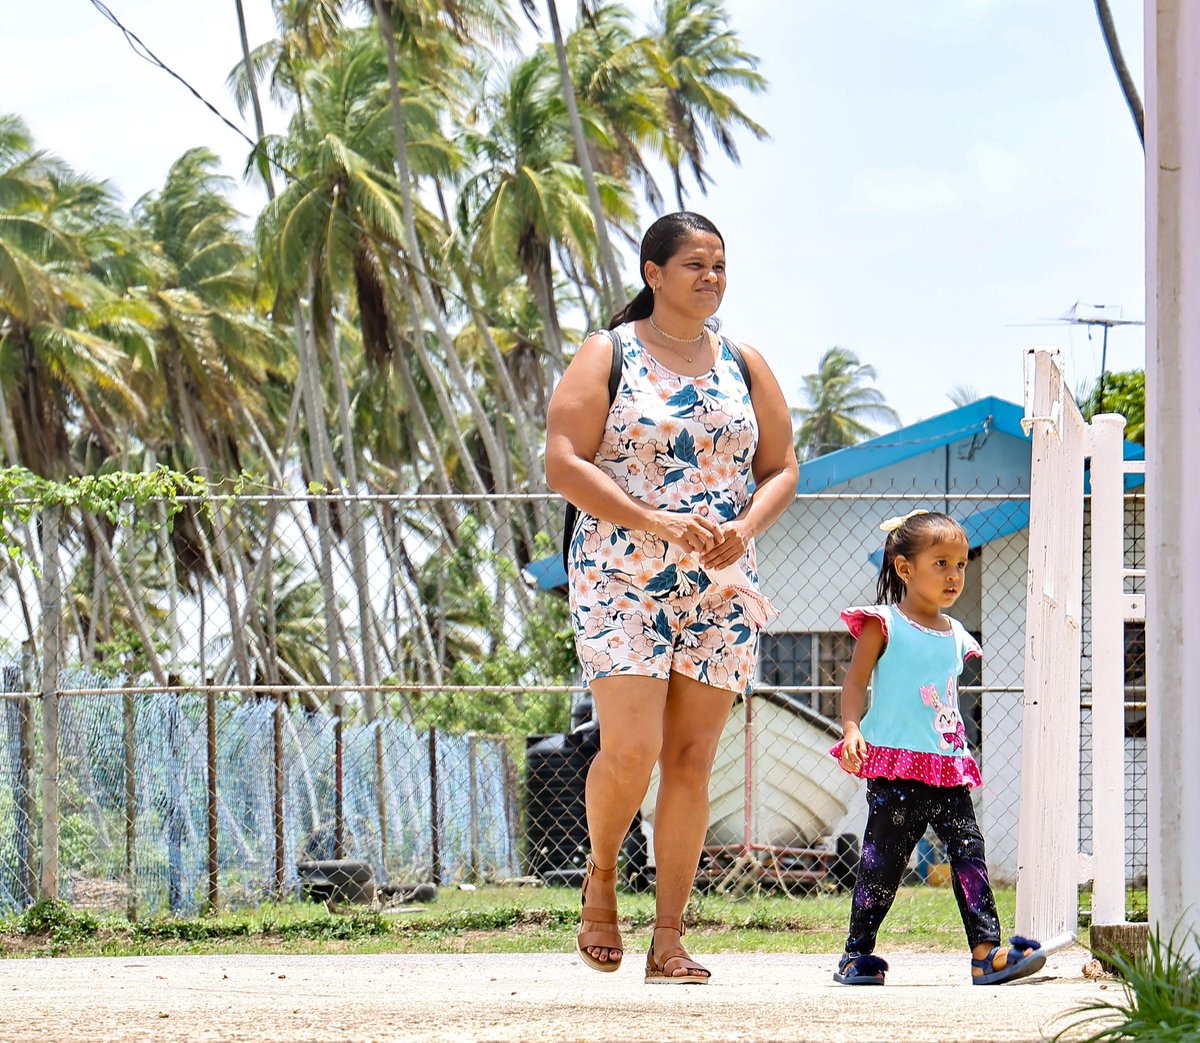 Last month, IOM TT provided assistance to 50 migrant and local families in Cedros and Icacos. Direct assistance plays a vital role in IOM's mission to promote the well-being of migrant populations as well as their host communities and ensure access to basic needs. @StatePRM